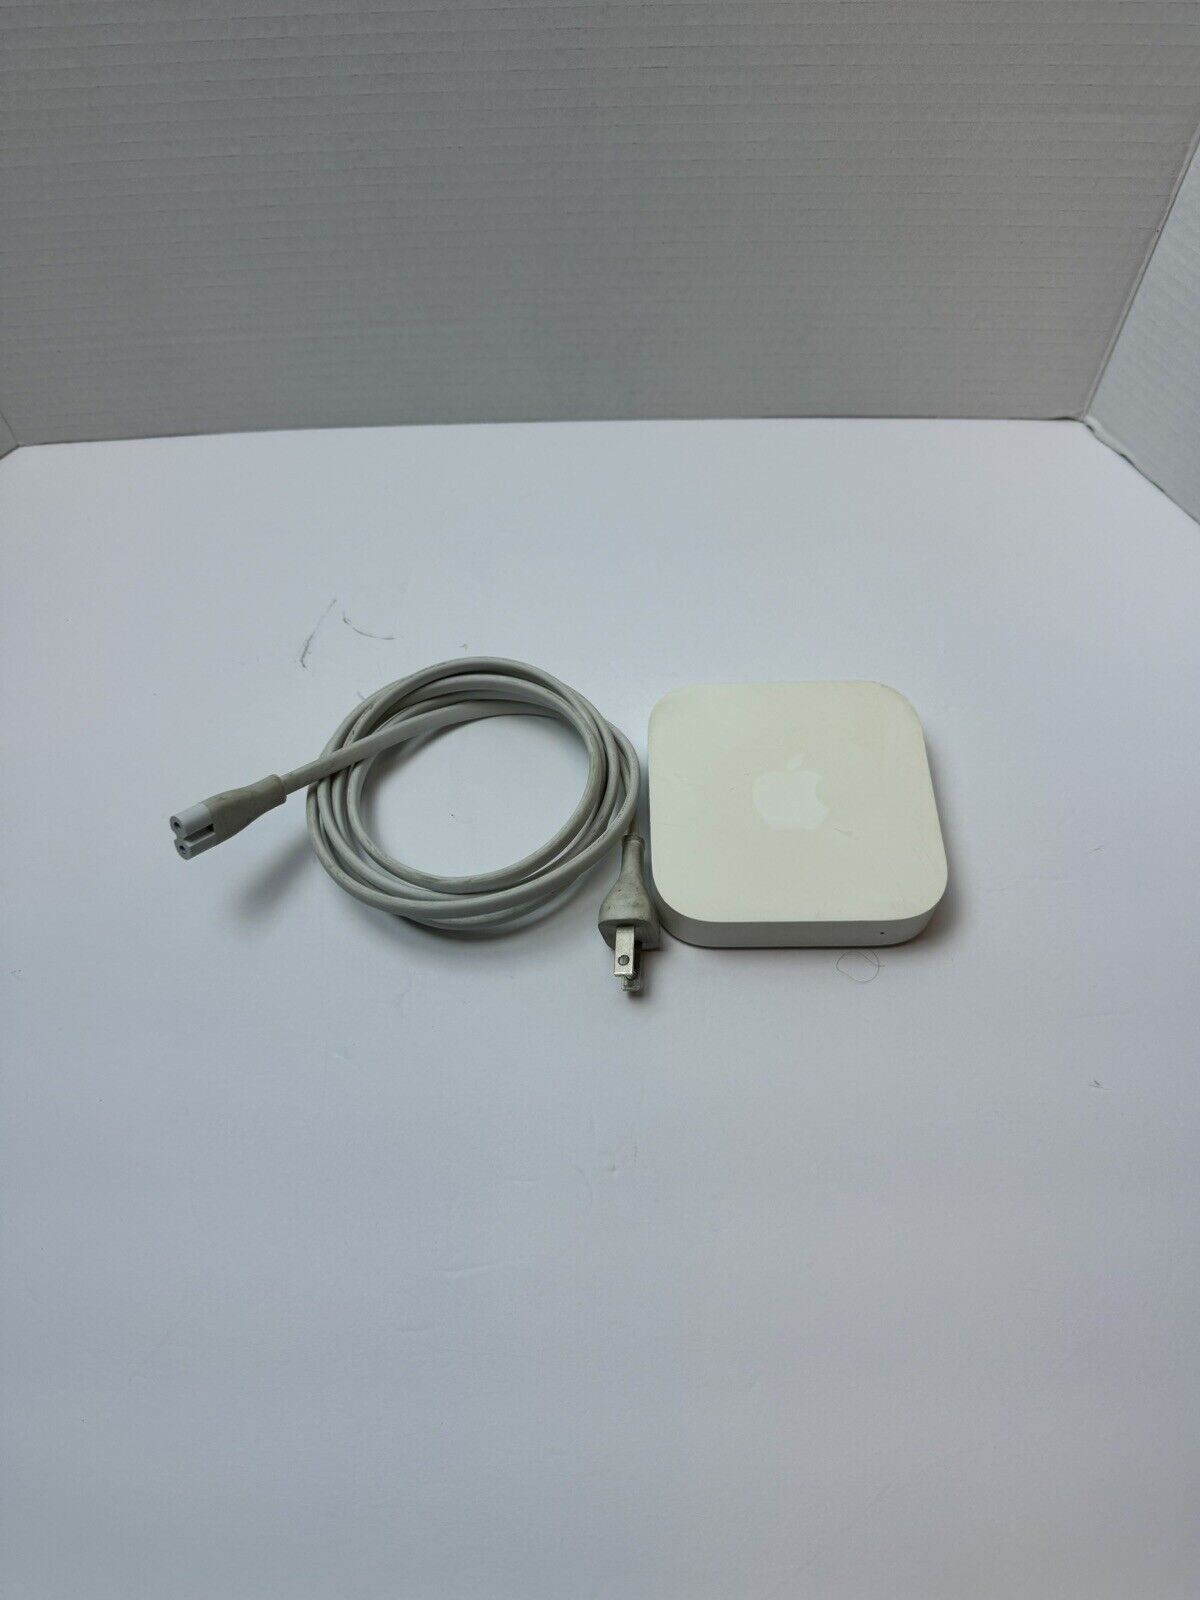 Apple Airport Express A1392 2nd Generation 802.11n WiFi Router 